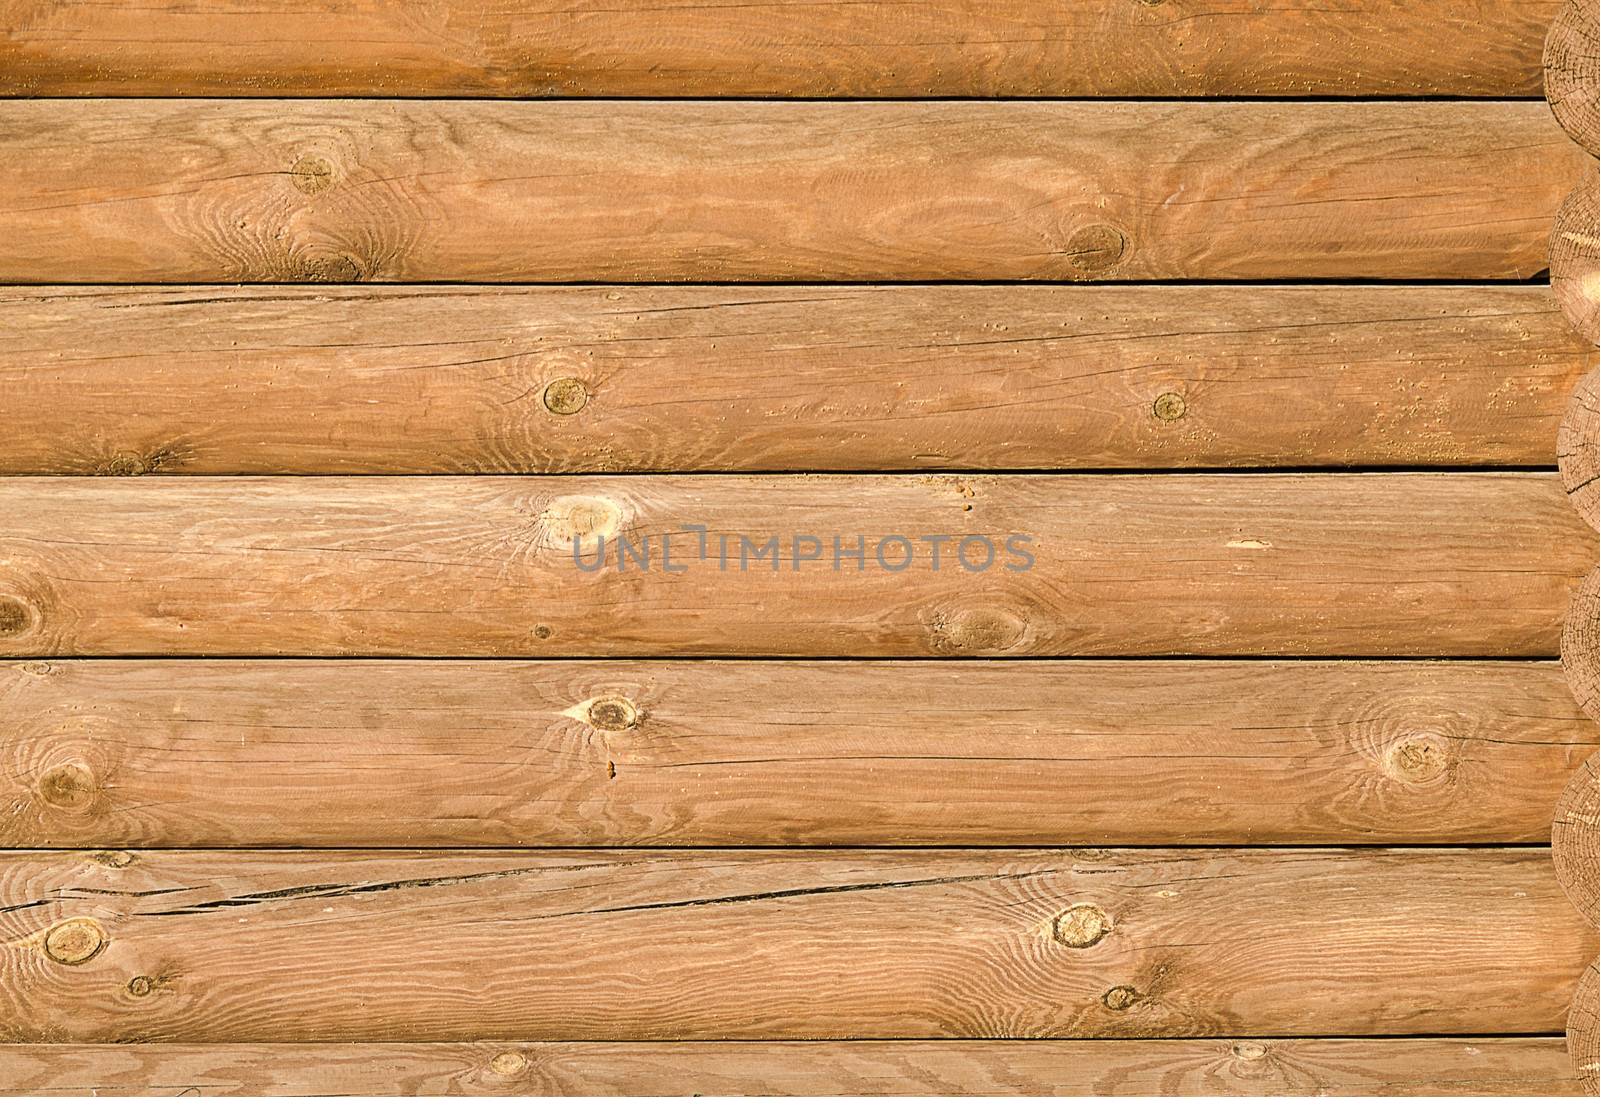 The Background texture of the new light-brown wooden logs